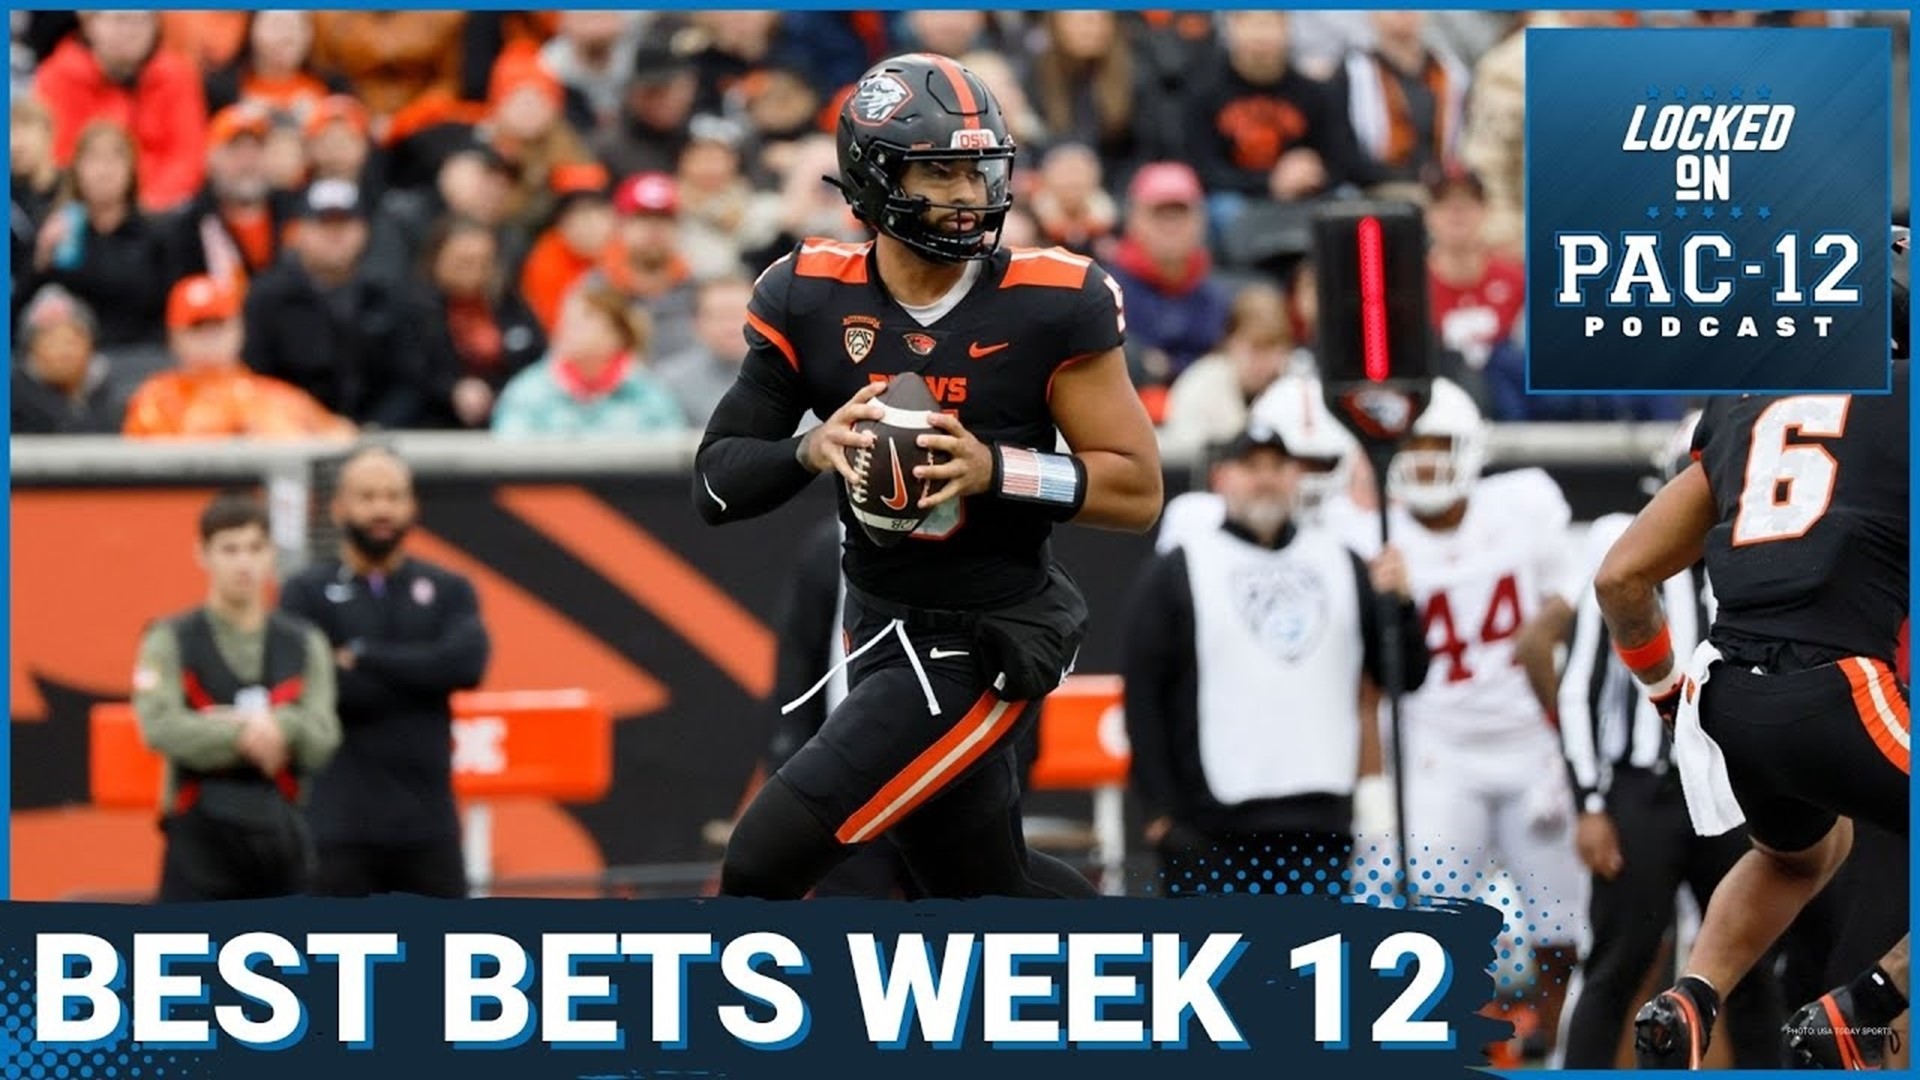 #11 Oregon State was robbed of hosting College GameDay against #5 Washington this week. They're a 2.5 point favorite at home and are among the top betting options.